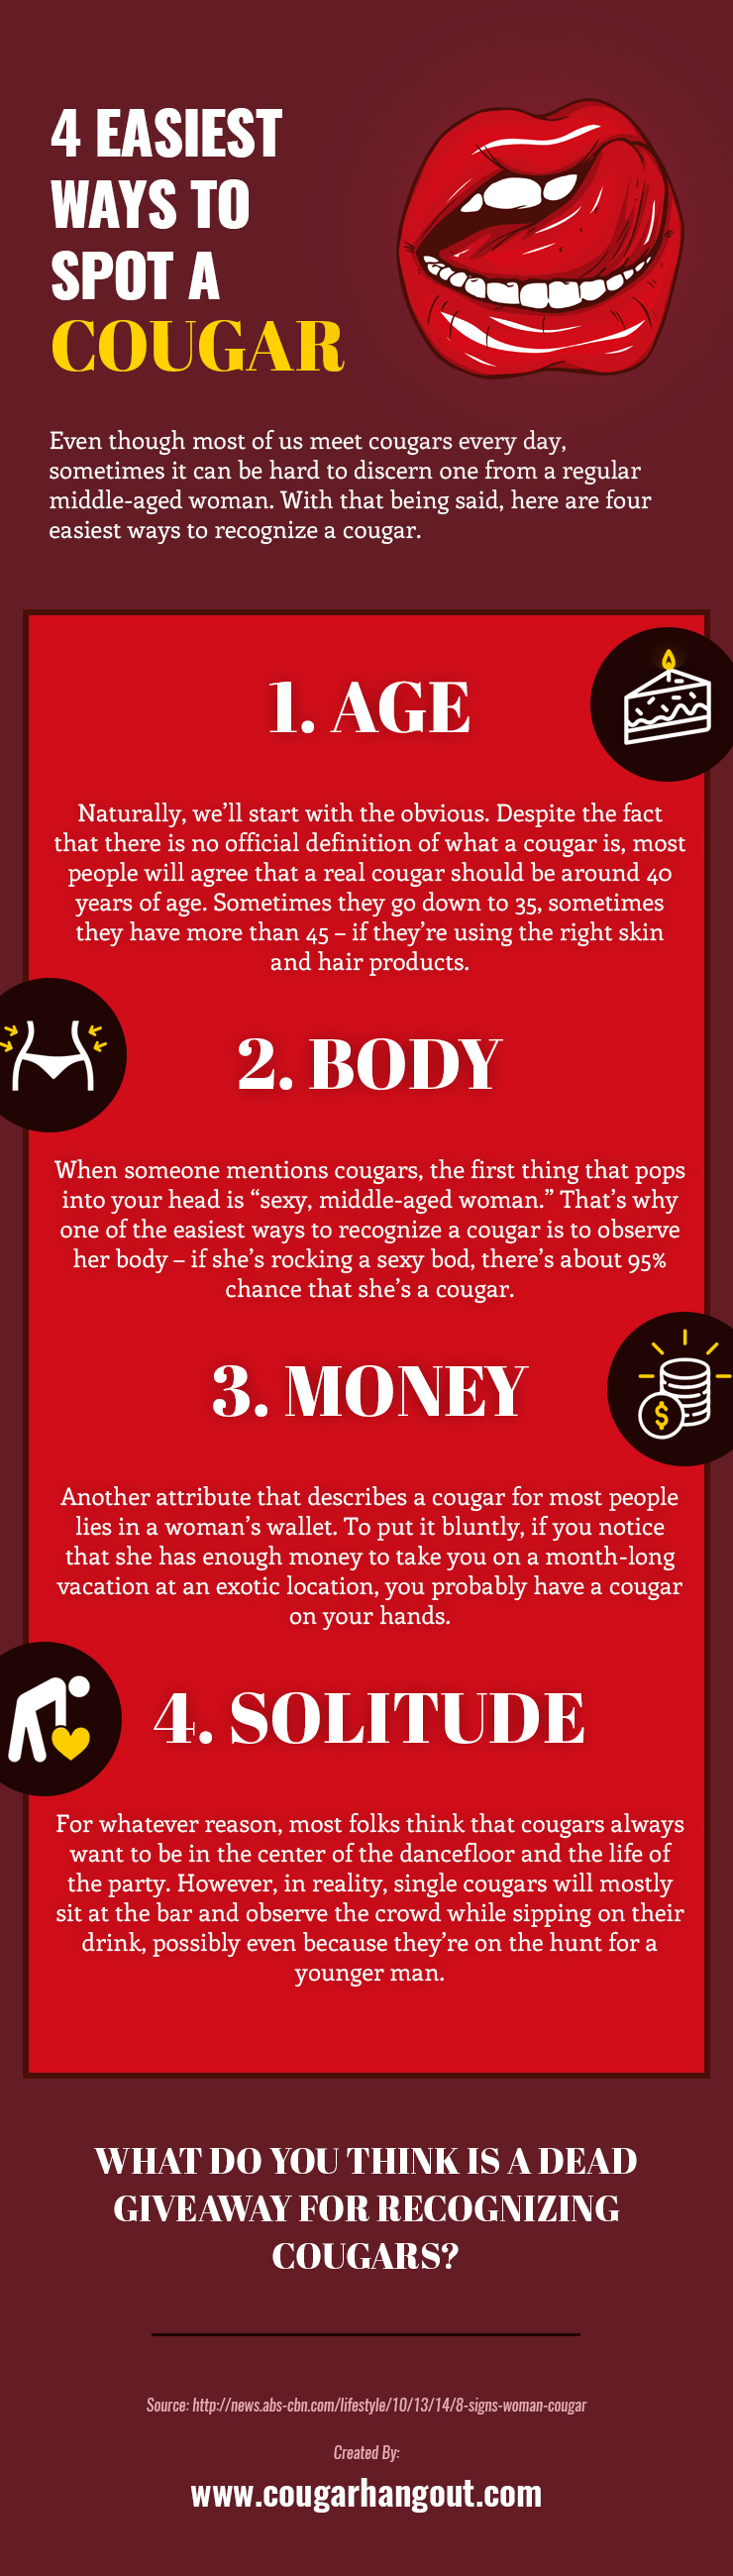 4 Easiest Ways to Spot a Cougar